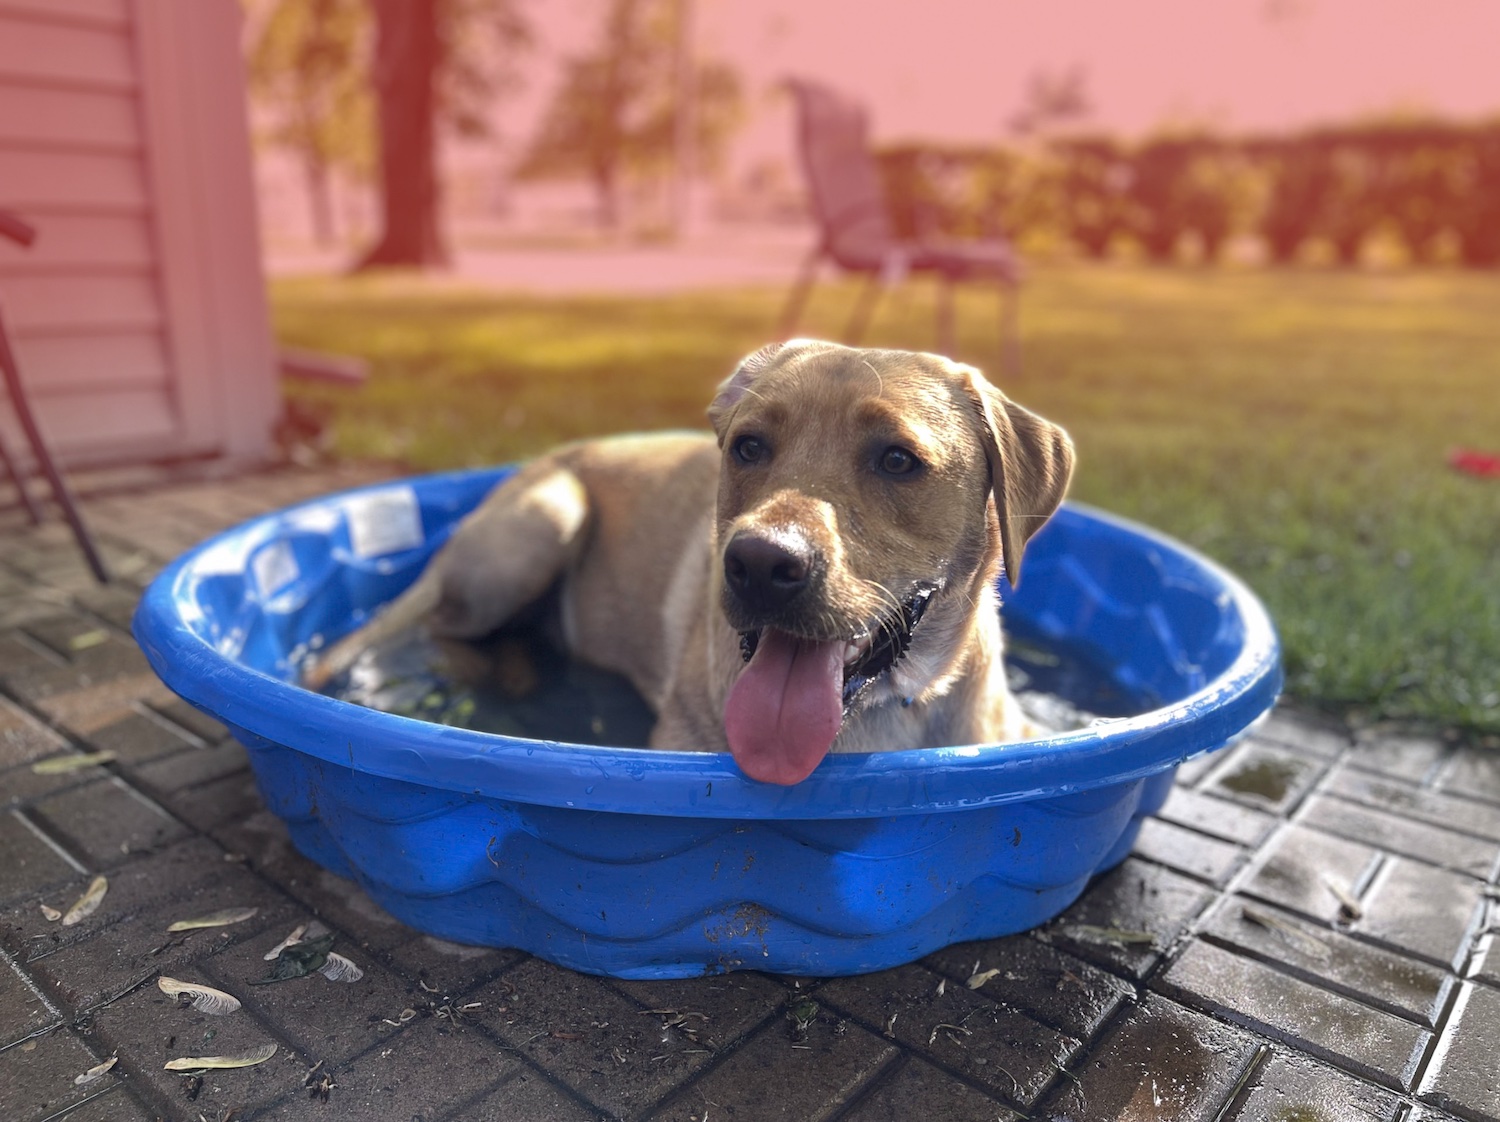 JPEG vs HEIC: A dog in a child's play pool.